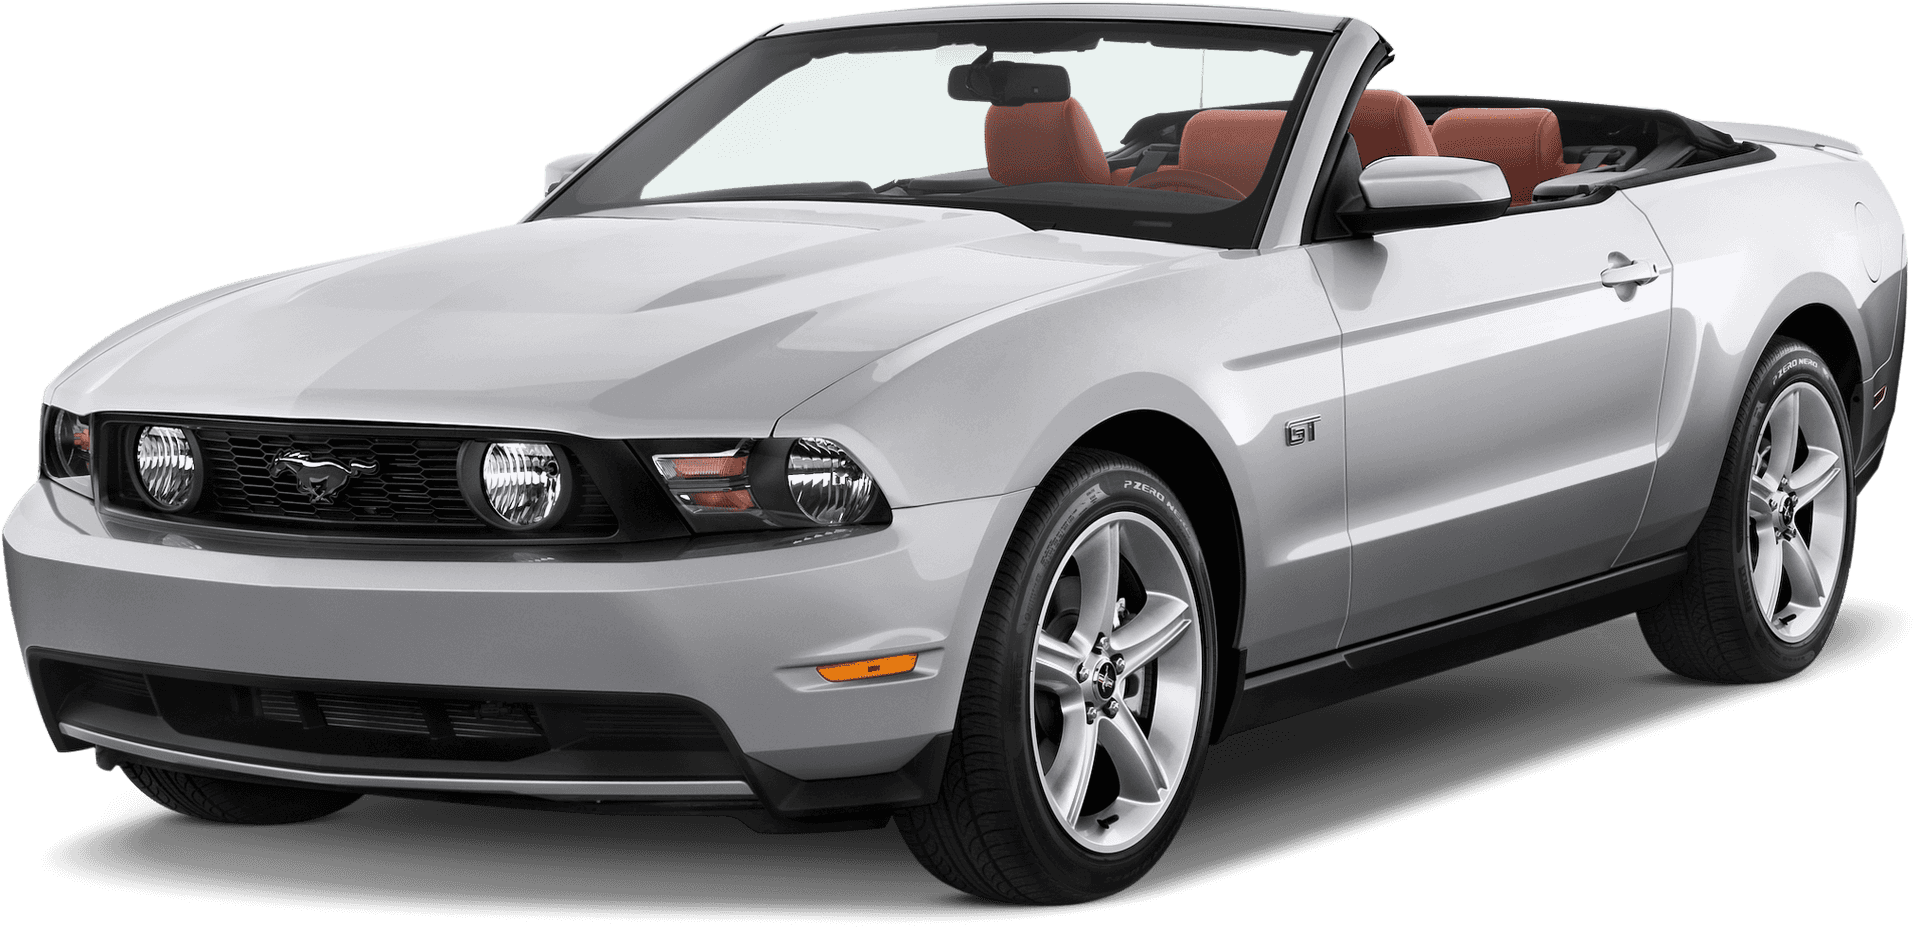 Silver Ford Mustang G T Convertible PNG image